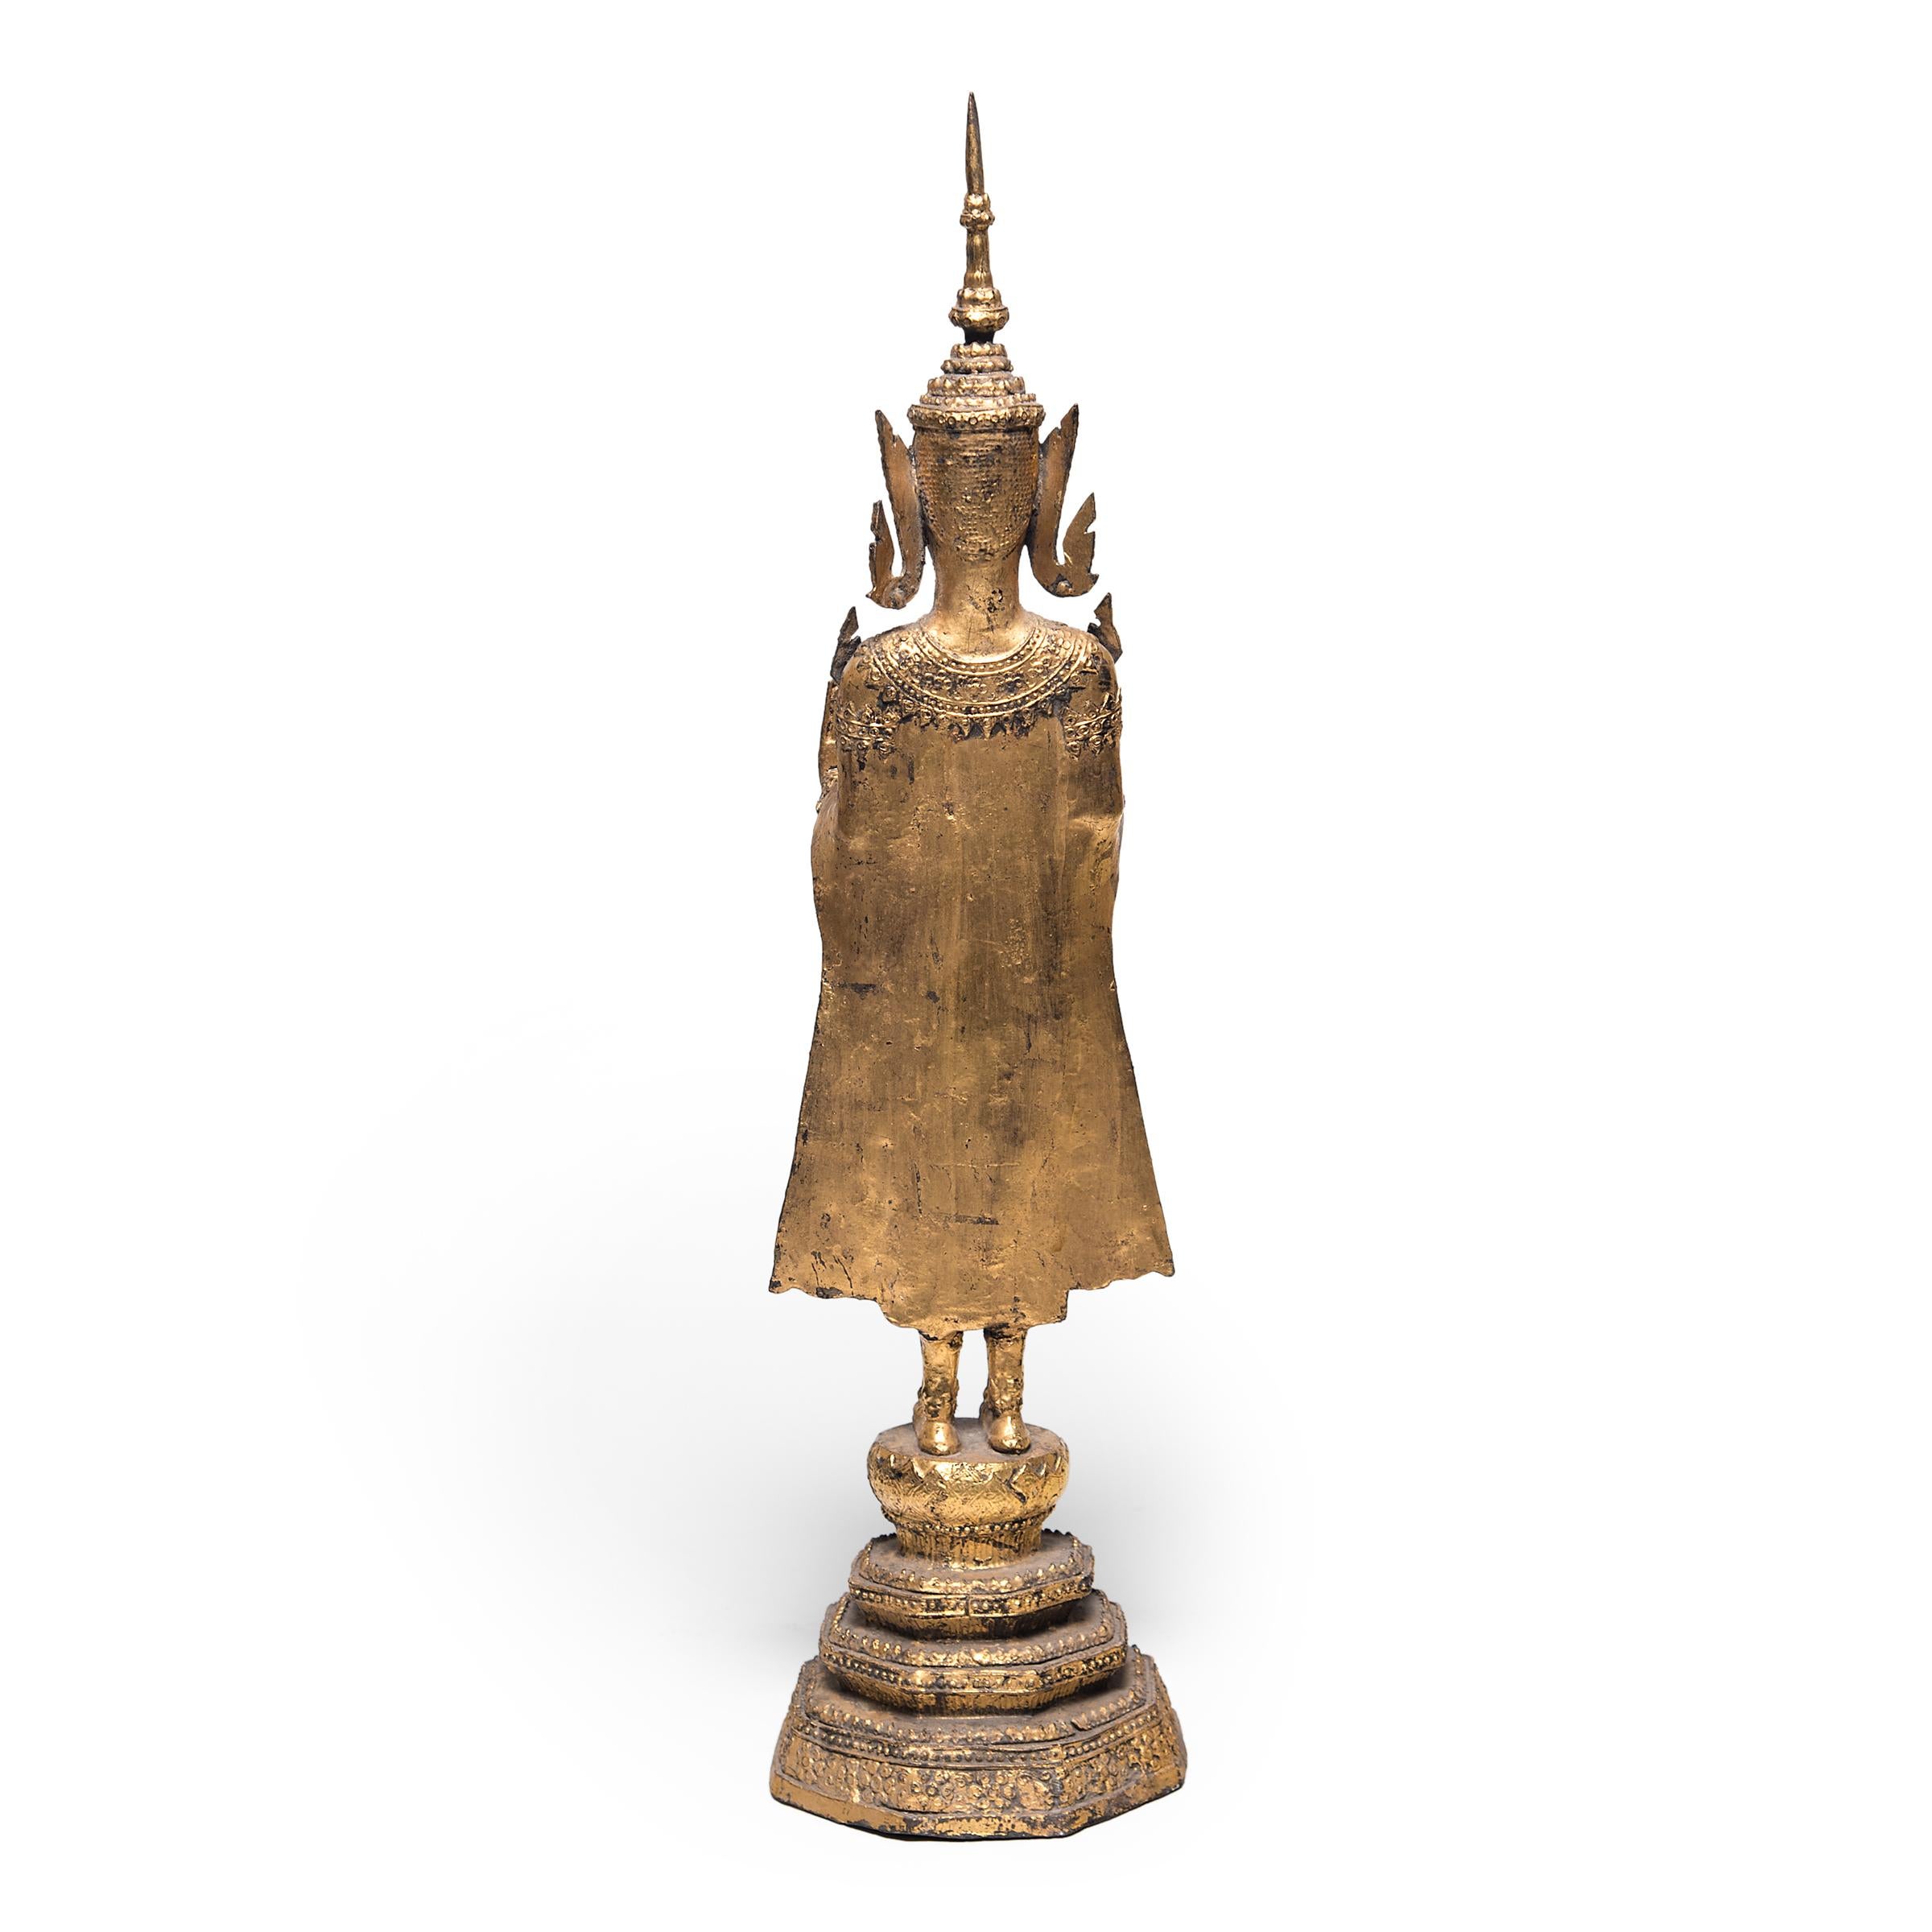 Dated to the mid-19th century during the Rattanakosin dynasty, this serene standing Buddha figure is intricately cast in bronze and decorated with gold leaf. The standing figure is costumed in bejeweled robes reminiscent of Thai royal attire and